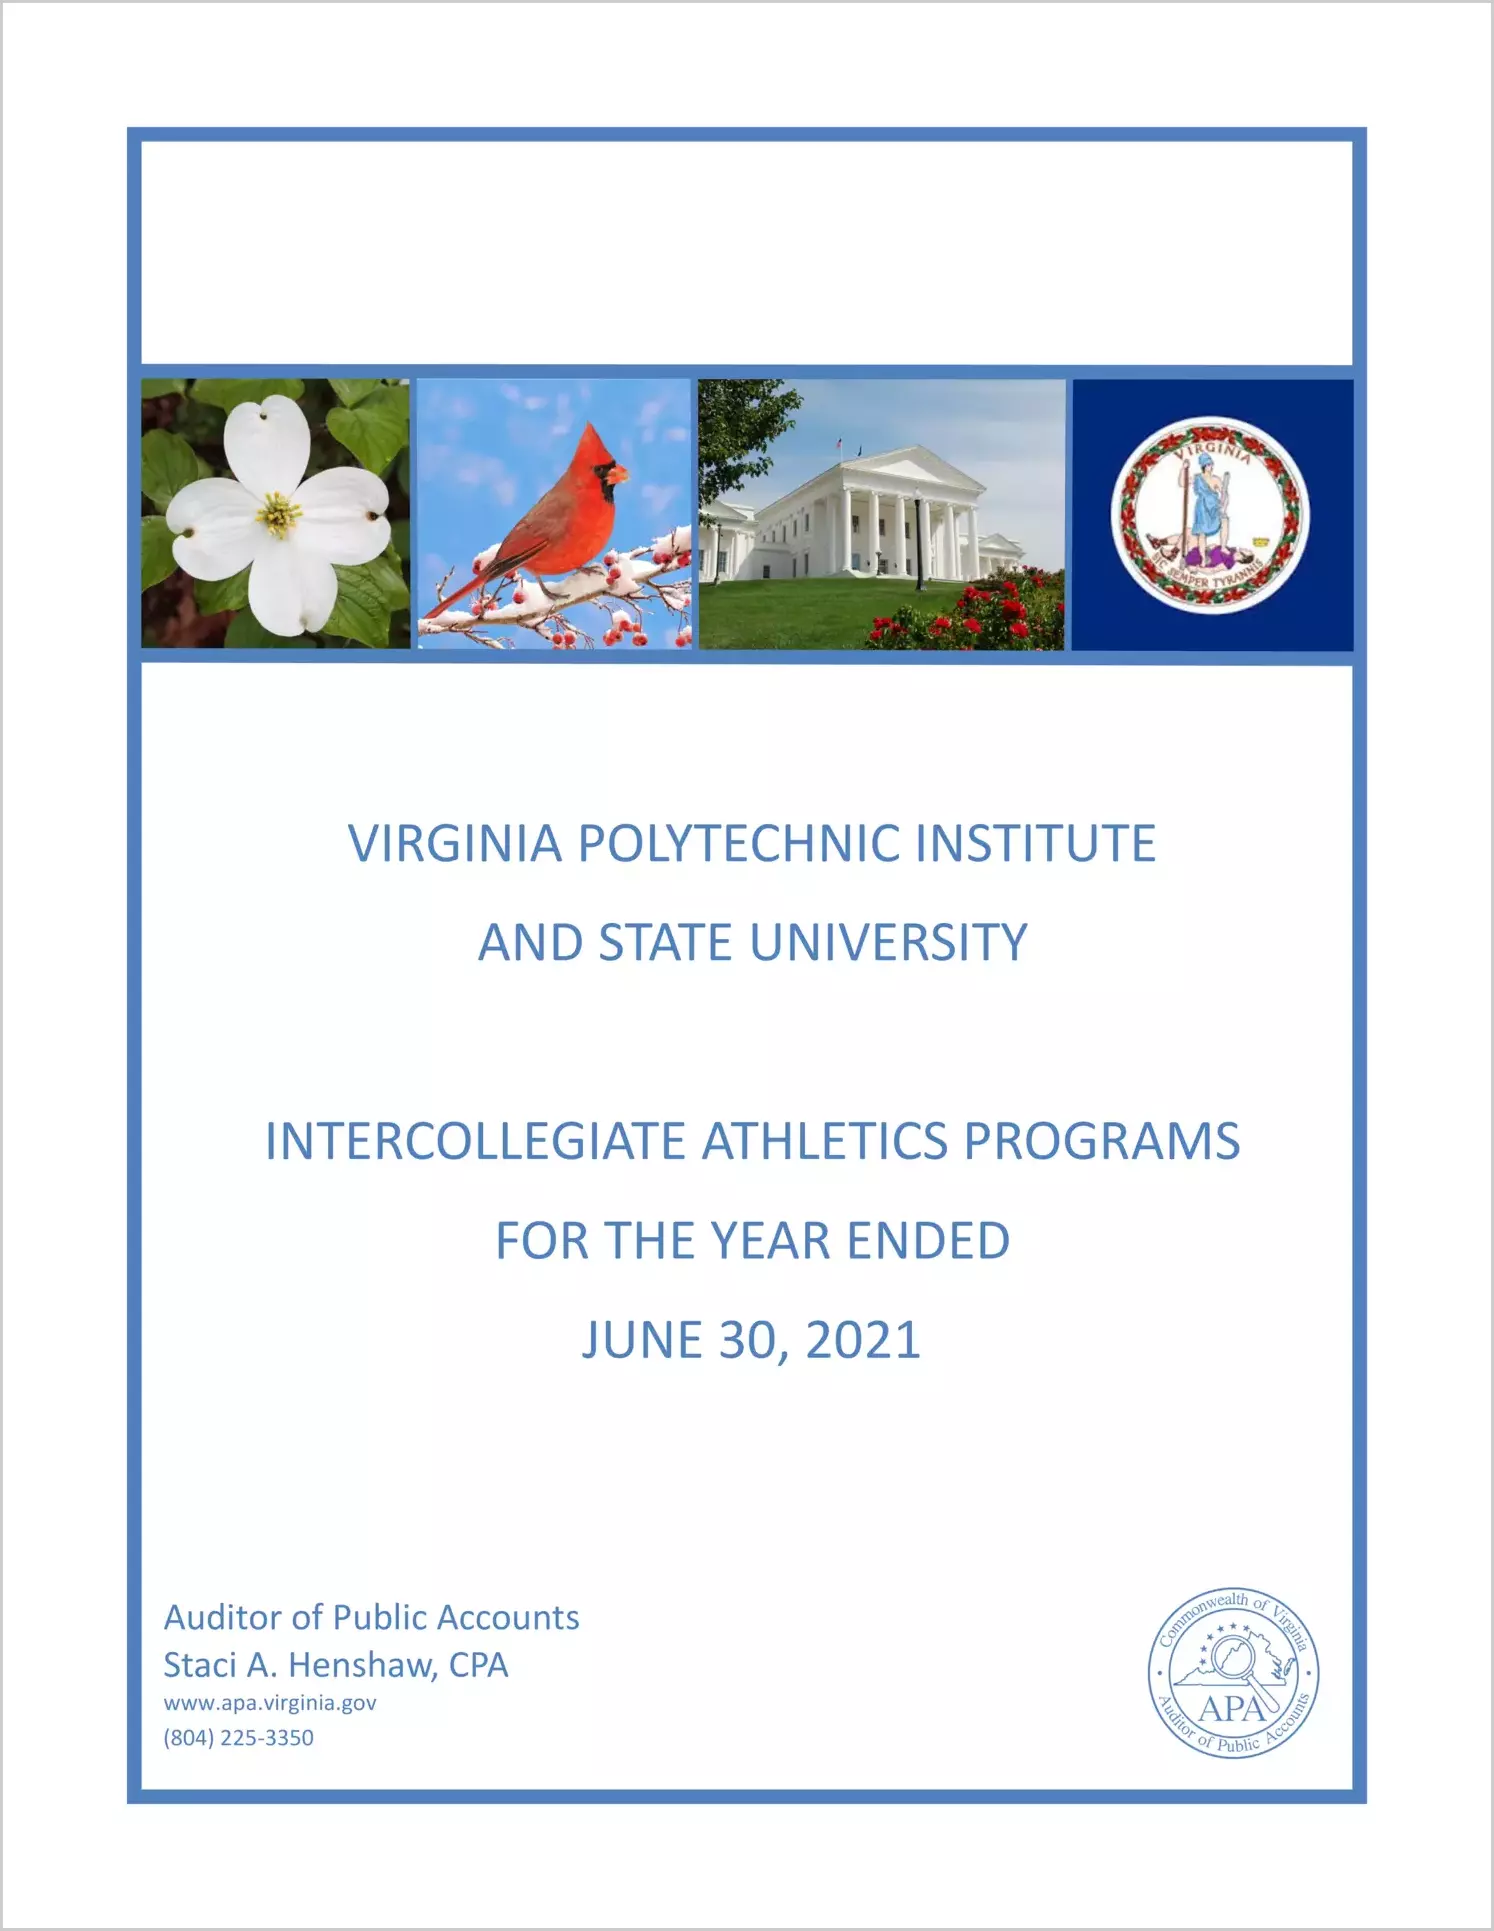 Virginia Polytechnic Institute and State University Intercollegiate Athletics Programs for the year ended June 30, 2021